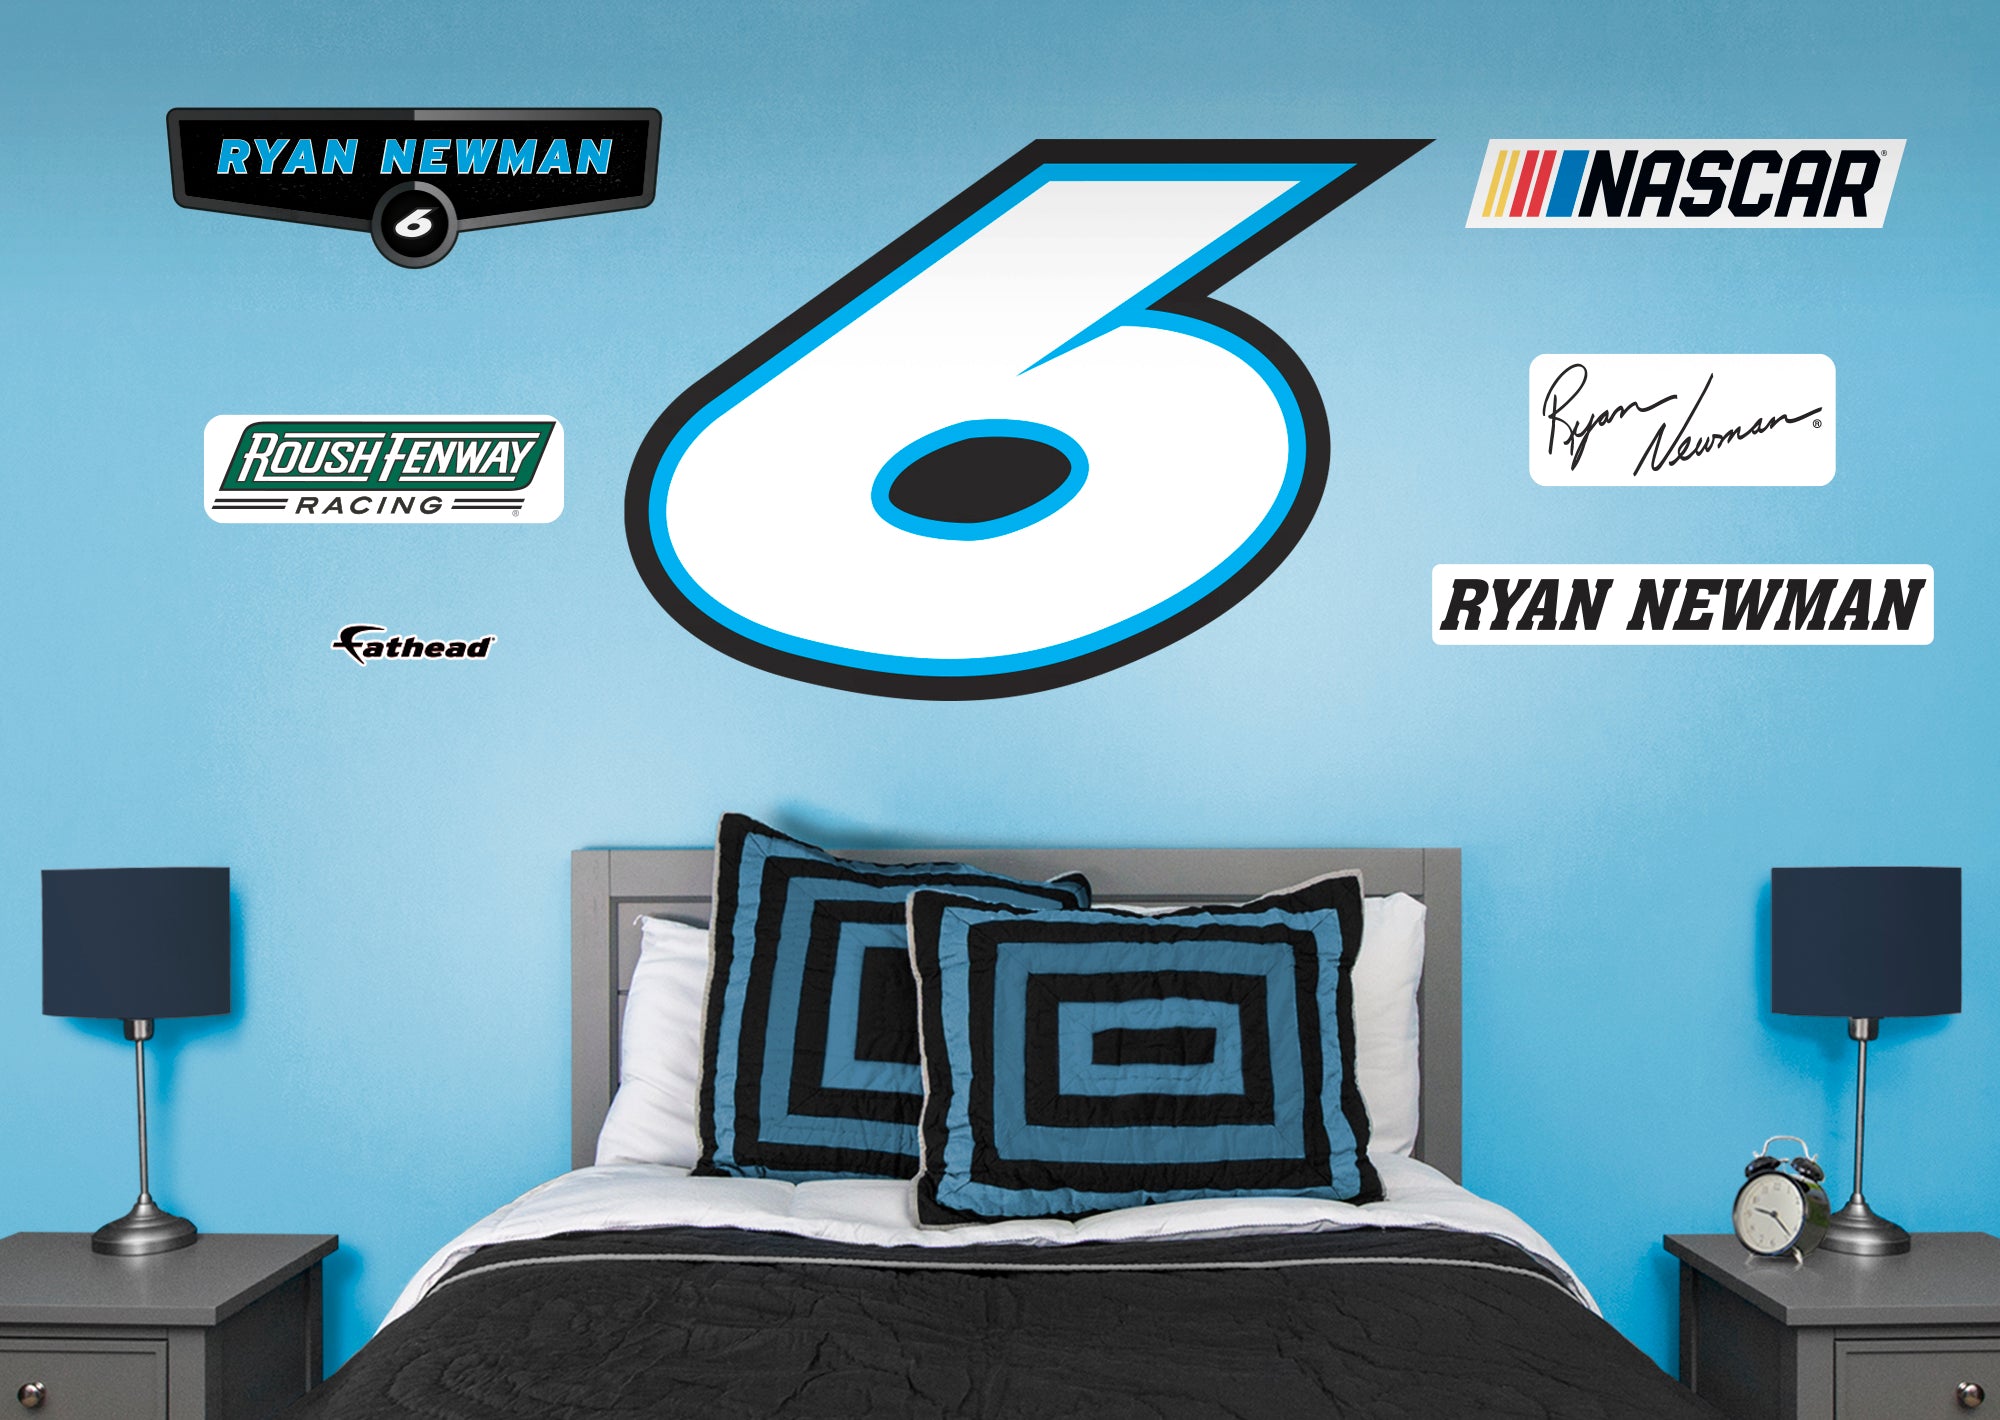 Ryan Newman 2021 #6 Logo - Officially Licensed NASCAR Removable Wall Decal Giant Logo + 5 Decals (51"W x 35"H) by Fathead | Viny